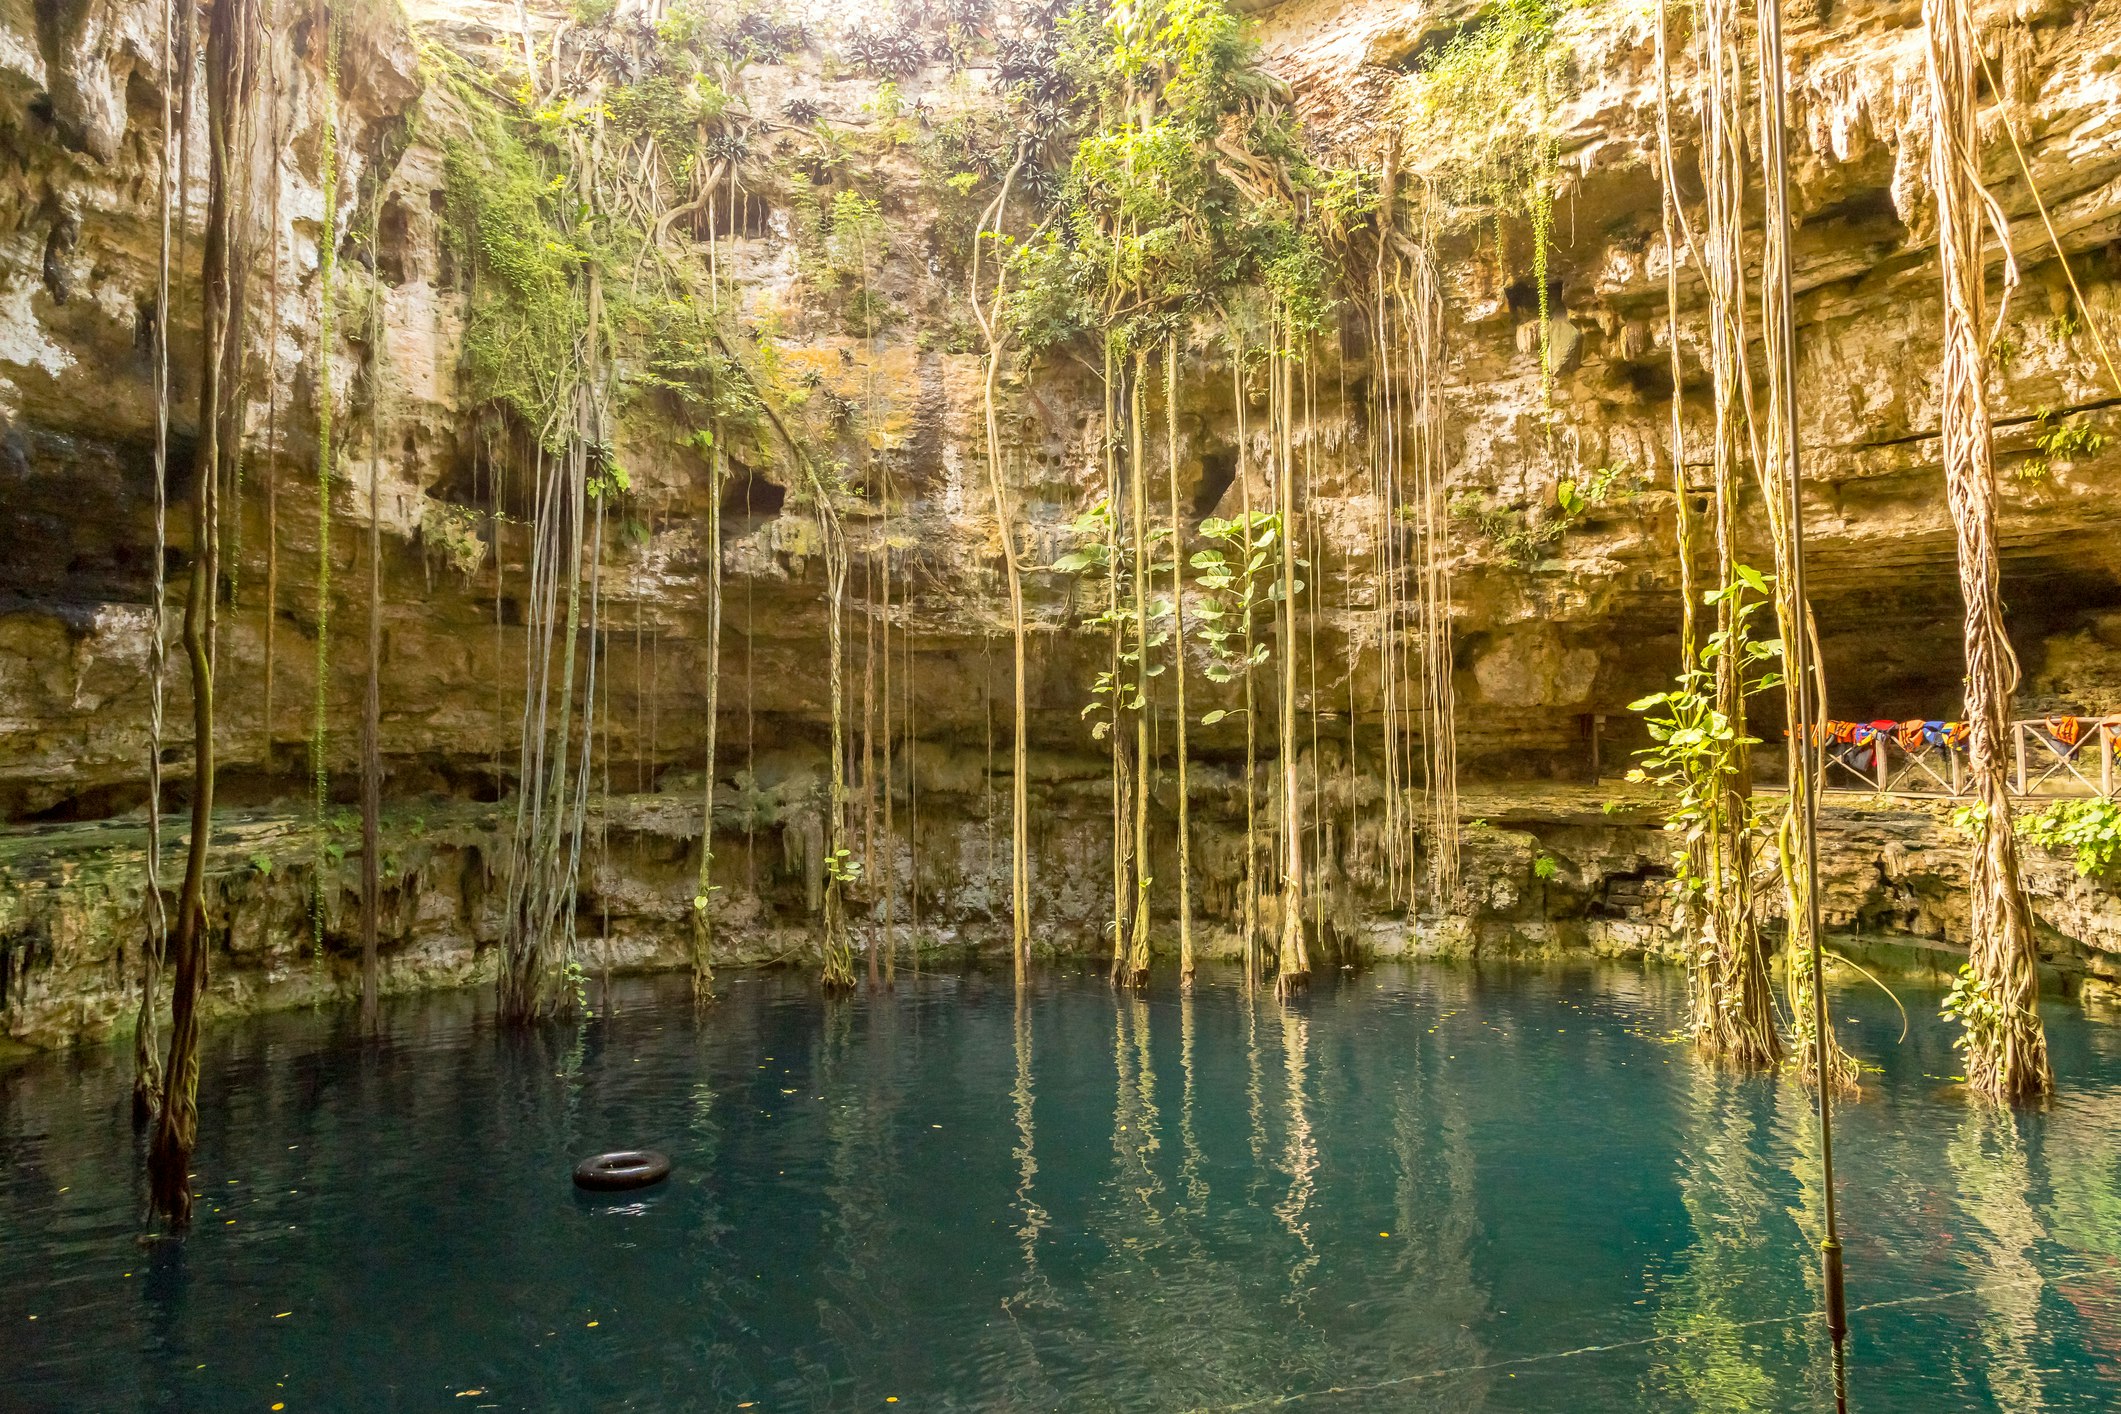 The deep blue waters of the cenote at Hacienda San Lorenzo are surrounded by buff and off-white stone walls strewn with long vines dangling from the top of the frame to the surface of the water. To the left, a black inner tube floats on the water.